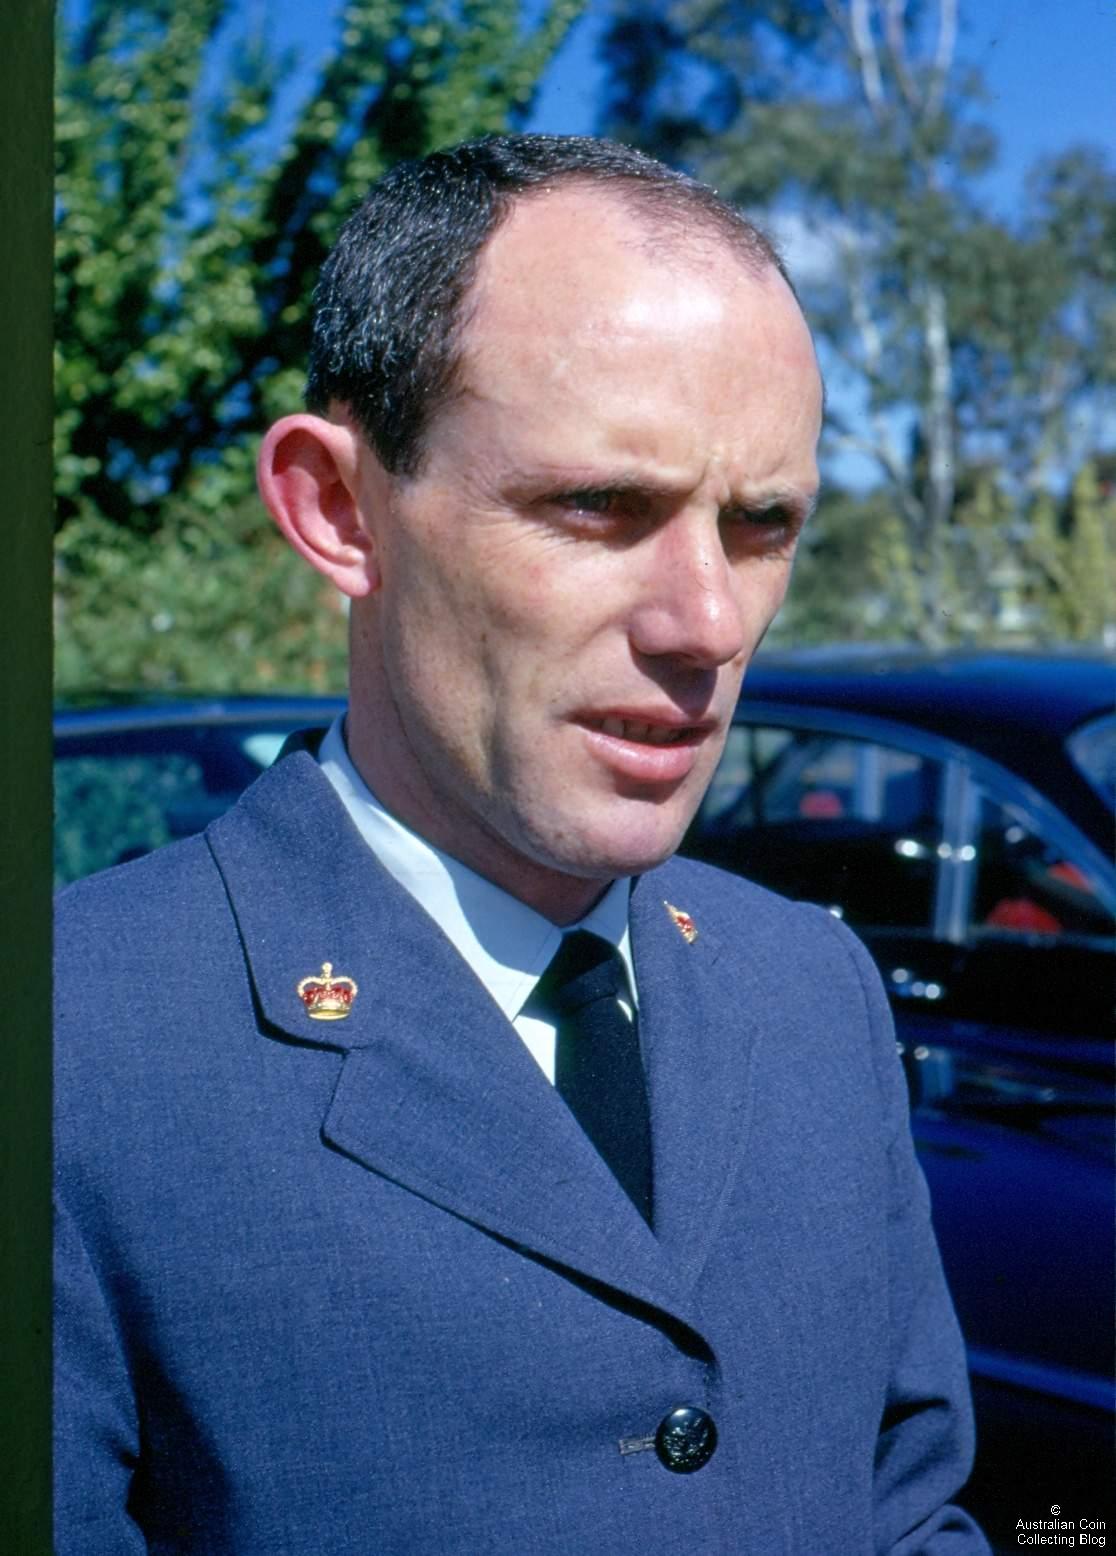 Mr Charlie Browne in 1966 as Commonwealth Car Driver